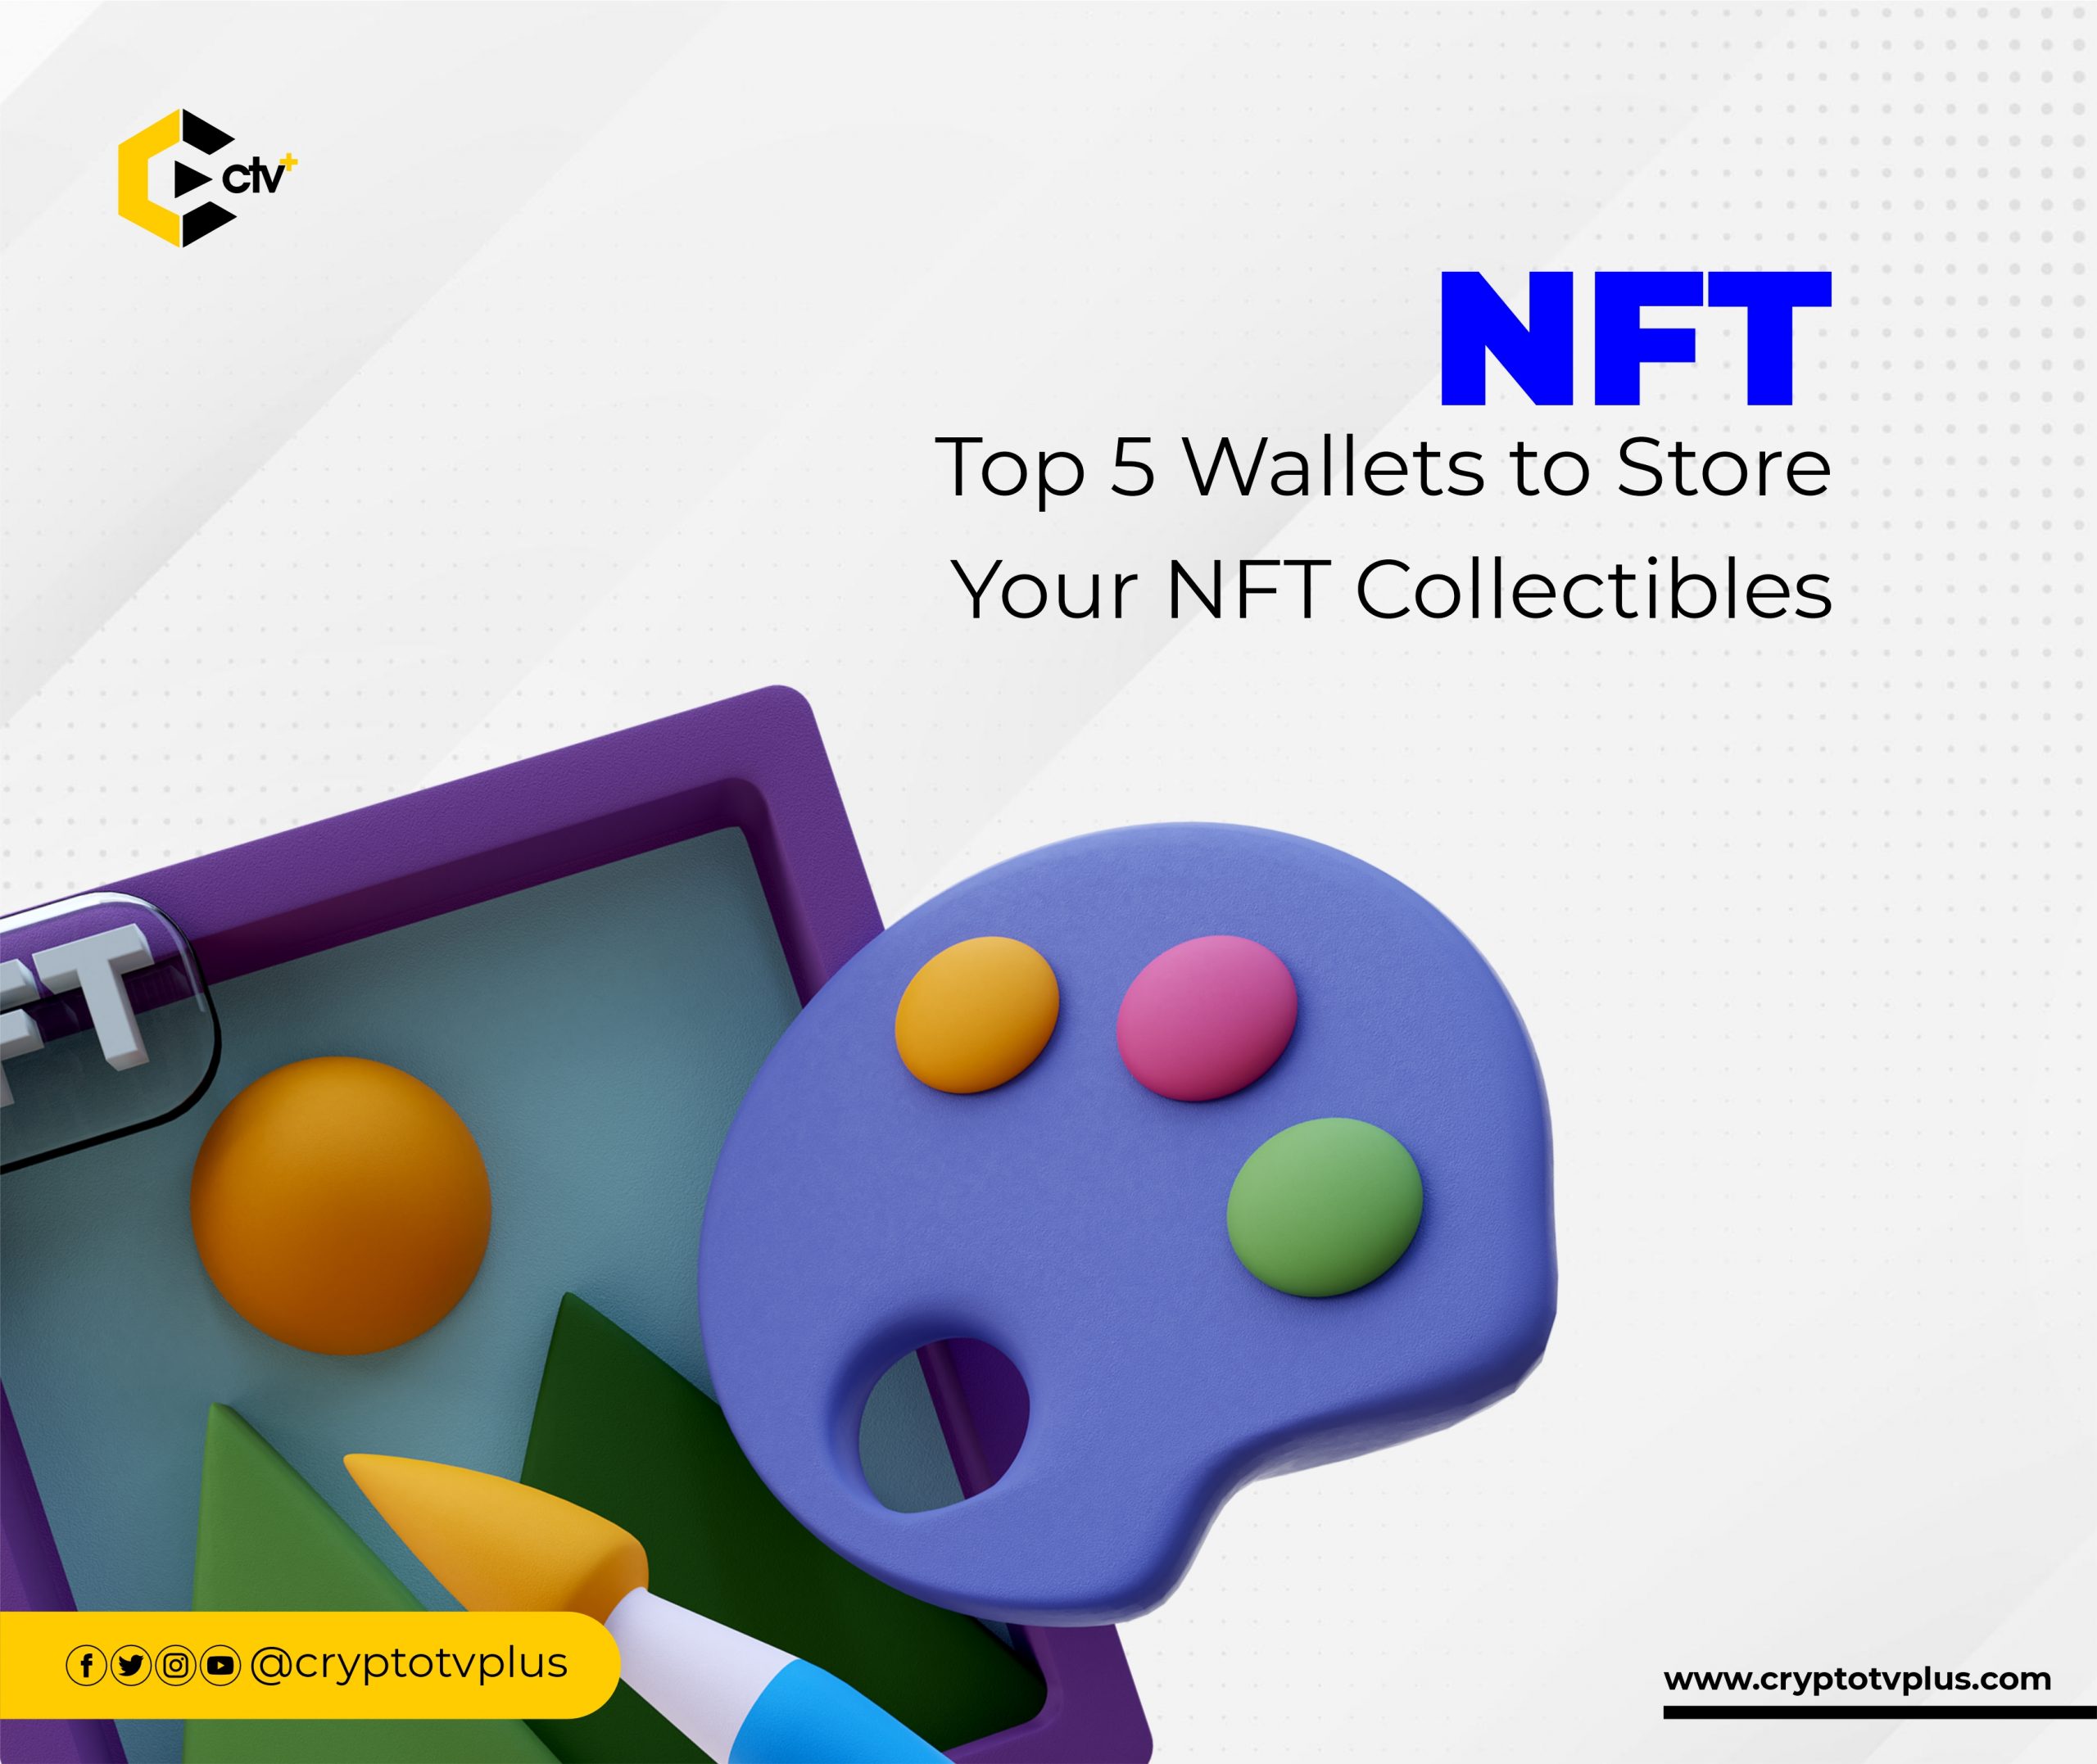 TOP 5 NFT WALLETS FOR 2022